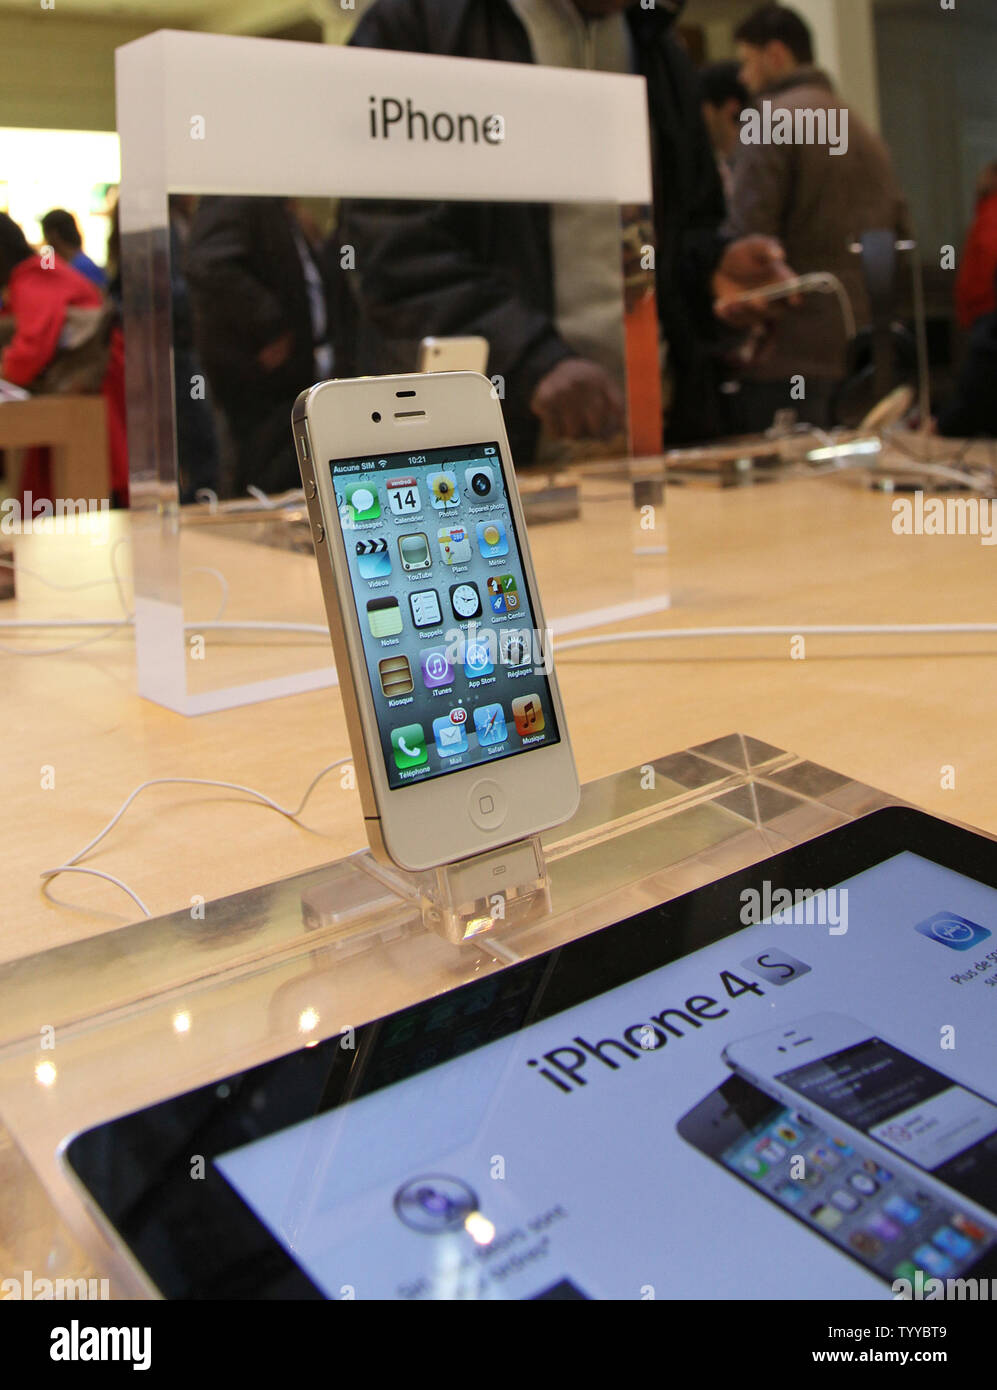 The new iPhone 4S is seen in the Apple Store near Place de l'Opera during  the phone's release today in Paris on October 14, 2011. The iPhone 4S went  on sale at